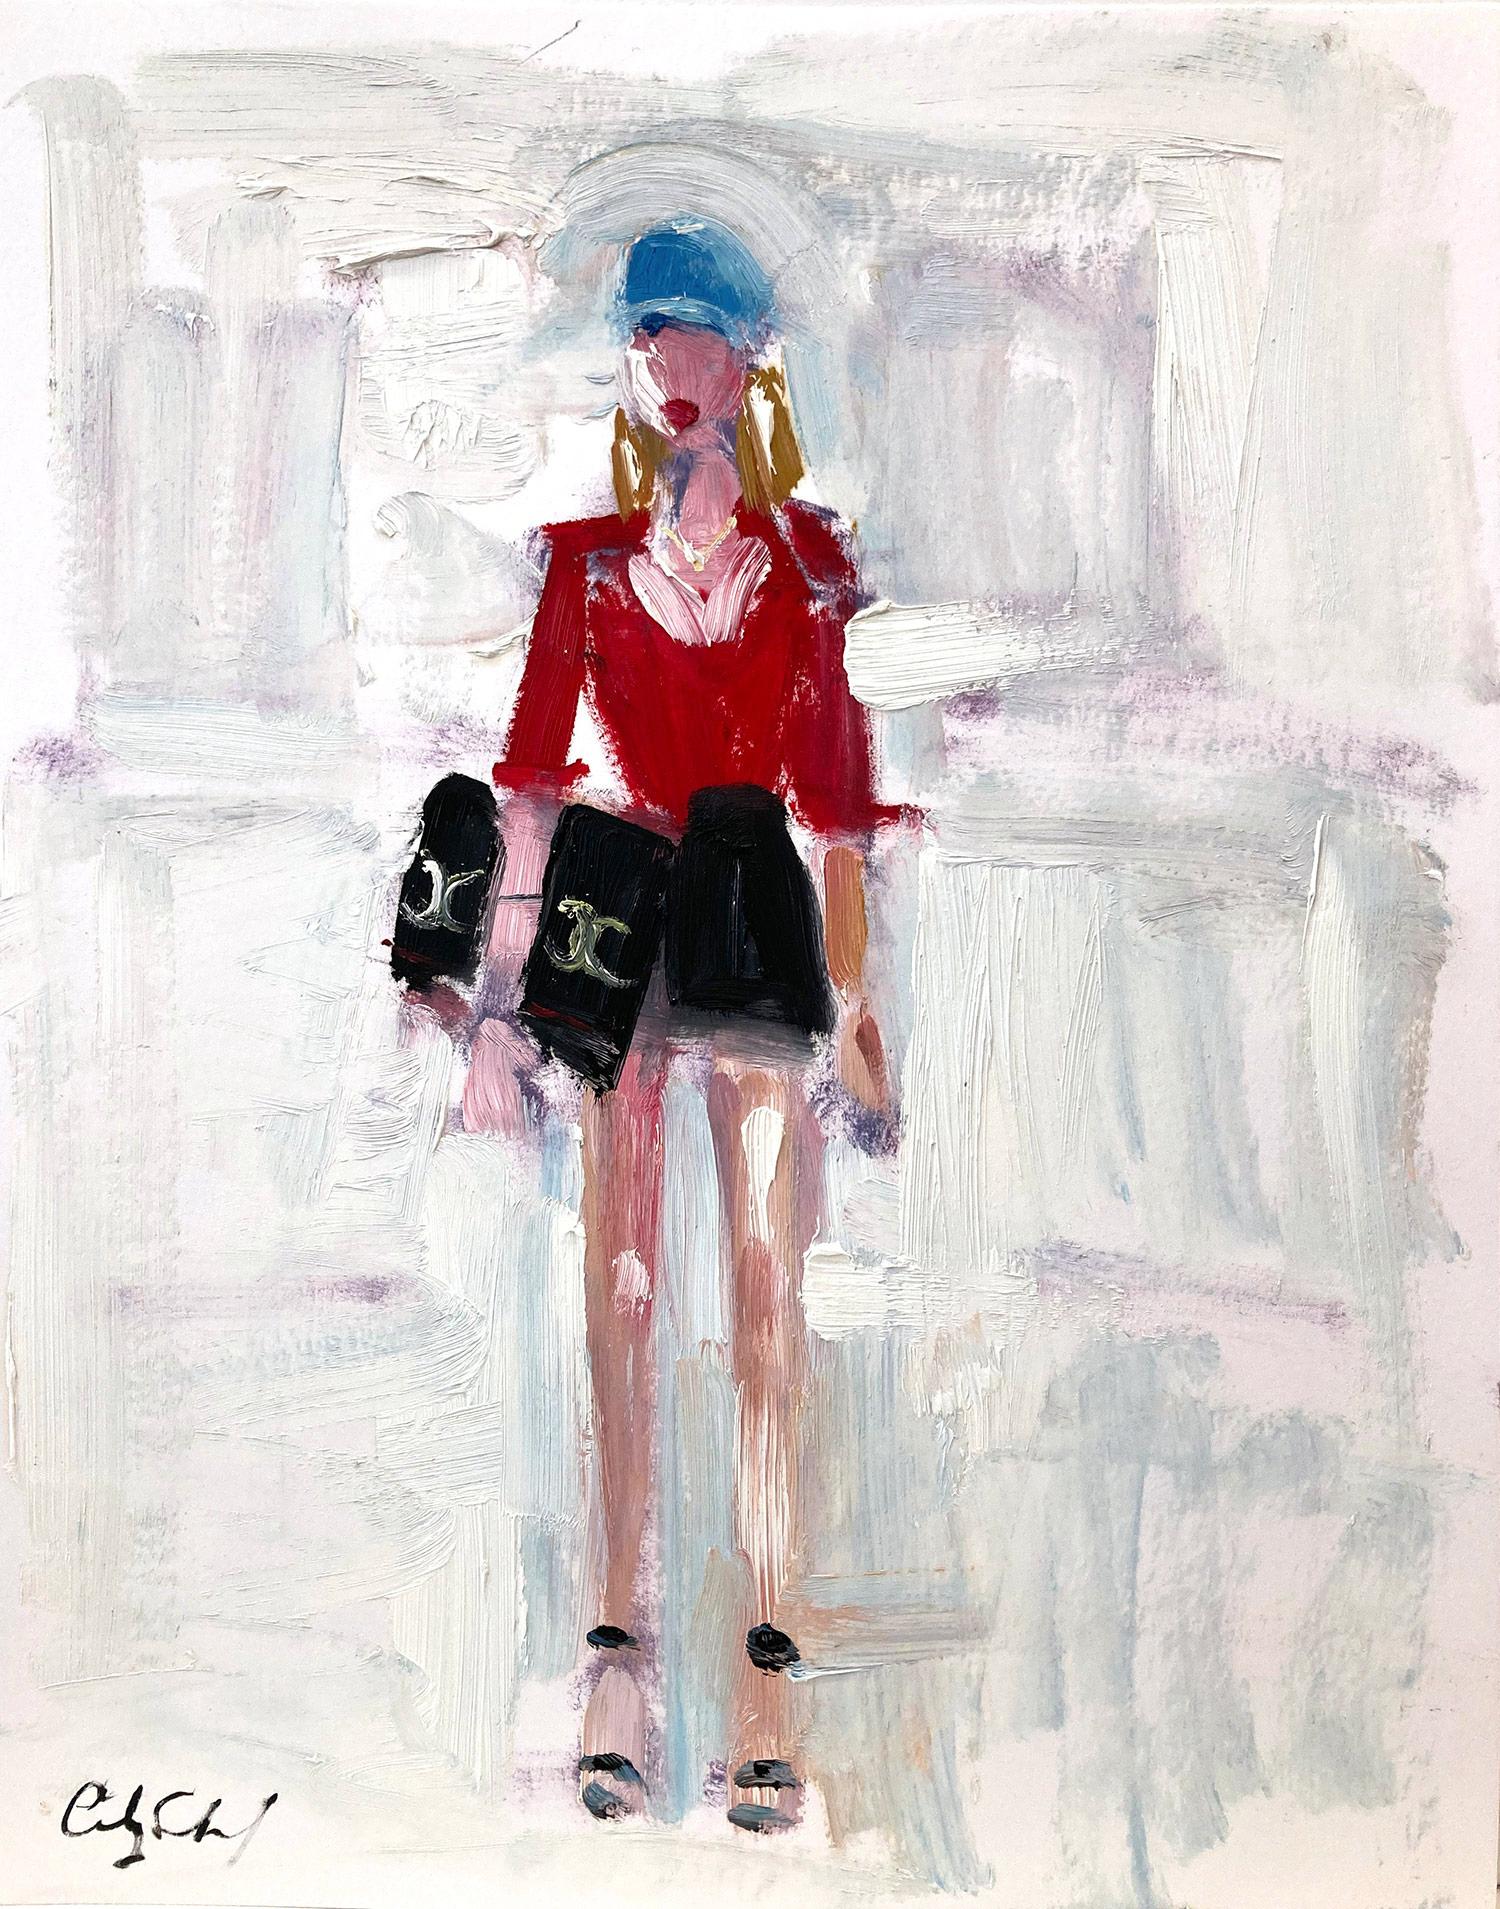 Cindy Shaoul Abstract Painting – „Stepping Out in Chanel“ Chanel Haute Couture, farbenfrohes Ölgemälde auf Papier